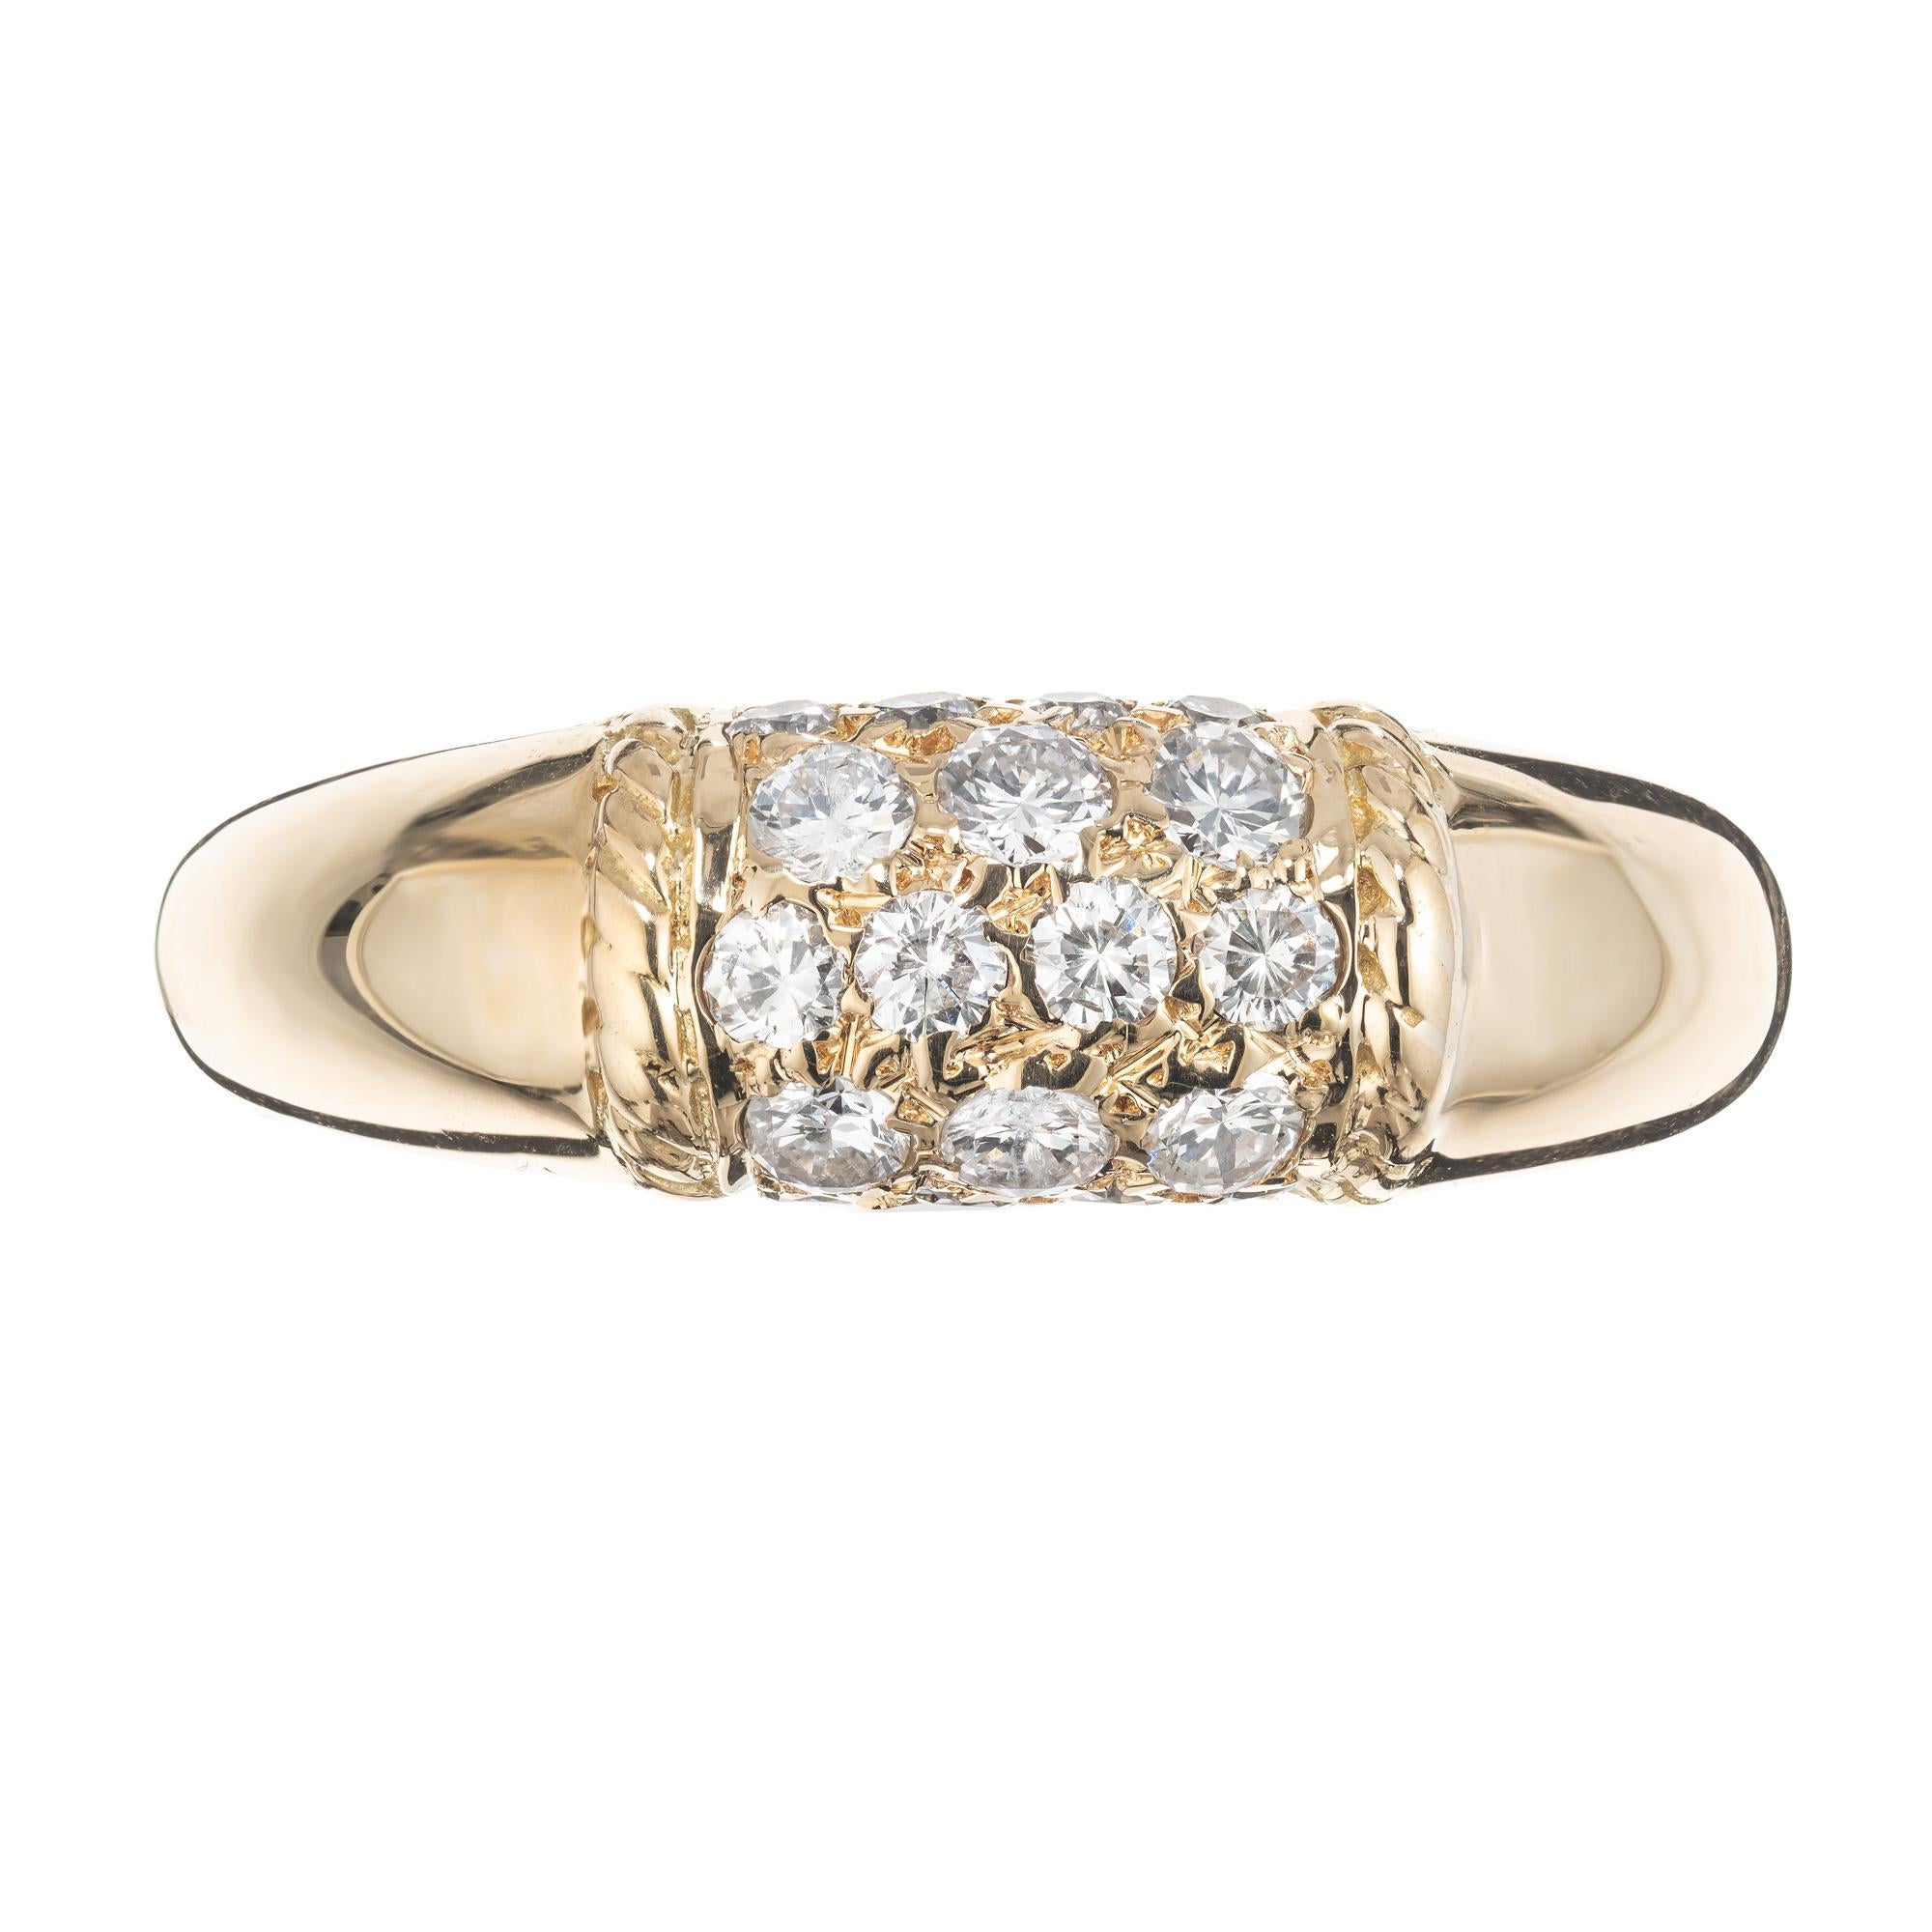 1960-1970 Classic Van Cleef & Arpels signed and numbered Philippine Diamond 18k yellow gold dome ring with classic plain shoulders. 18 round full cut round diamonds set in a yellow gold setting. 

18 round full cut Diamonds, approx. total weight